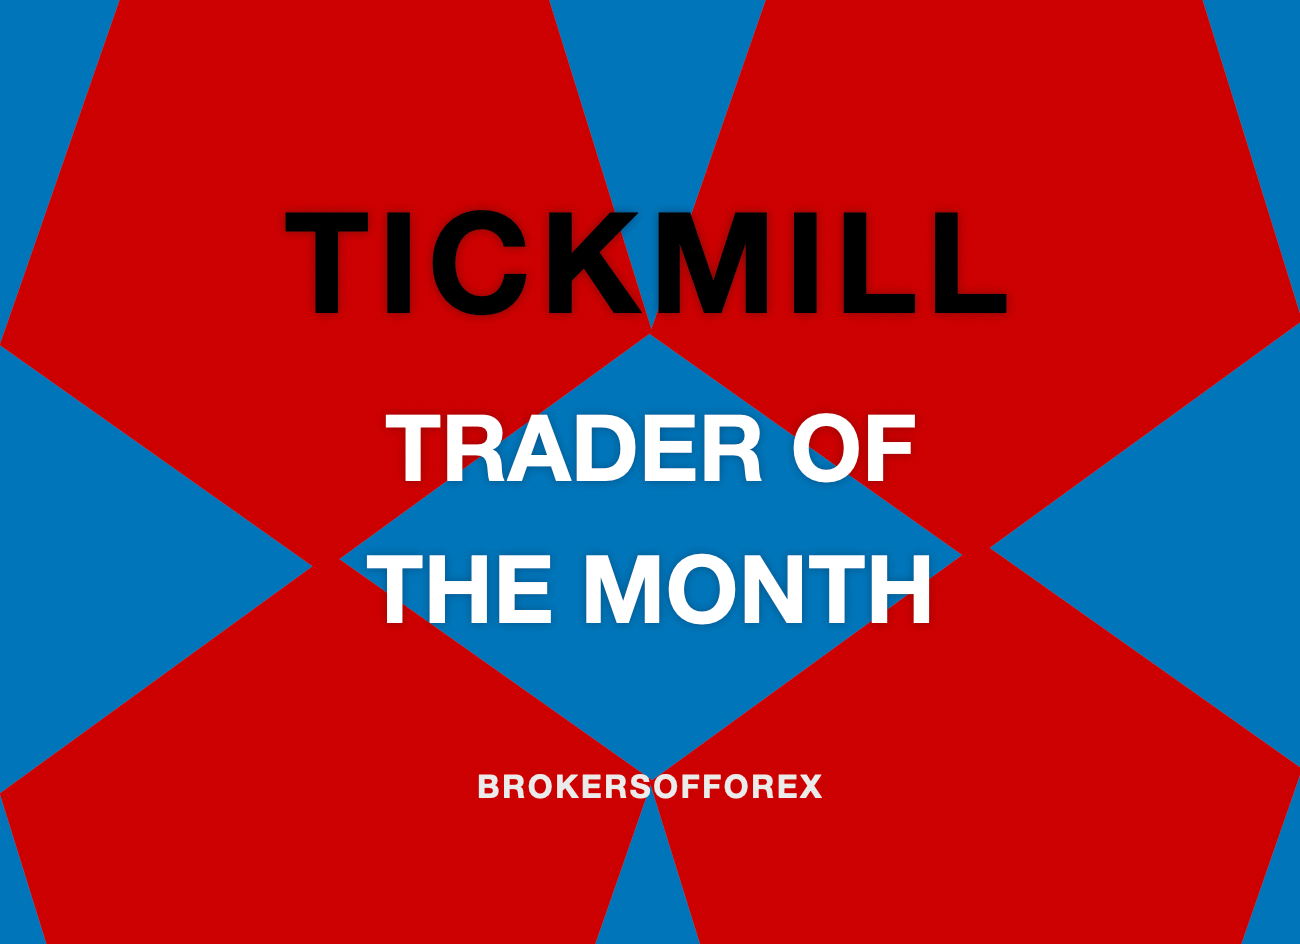 Tickmill Trader of the month